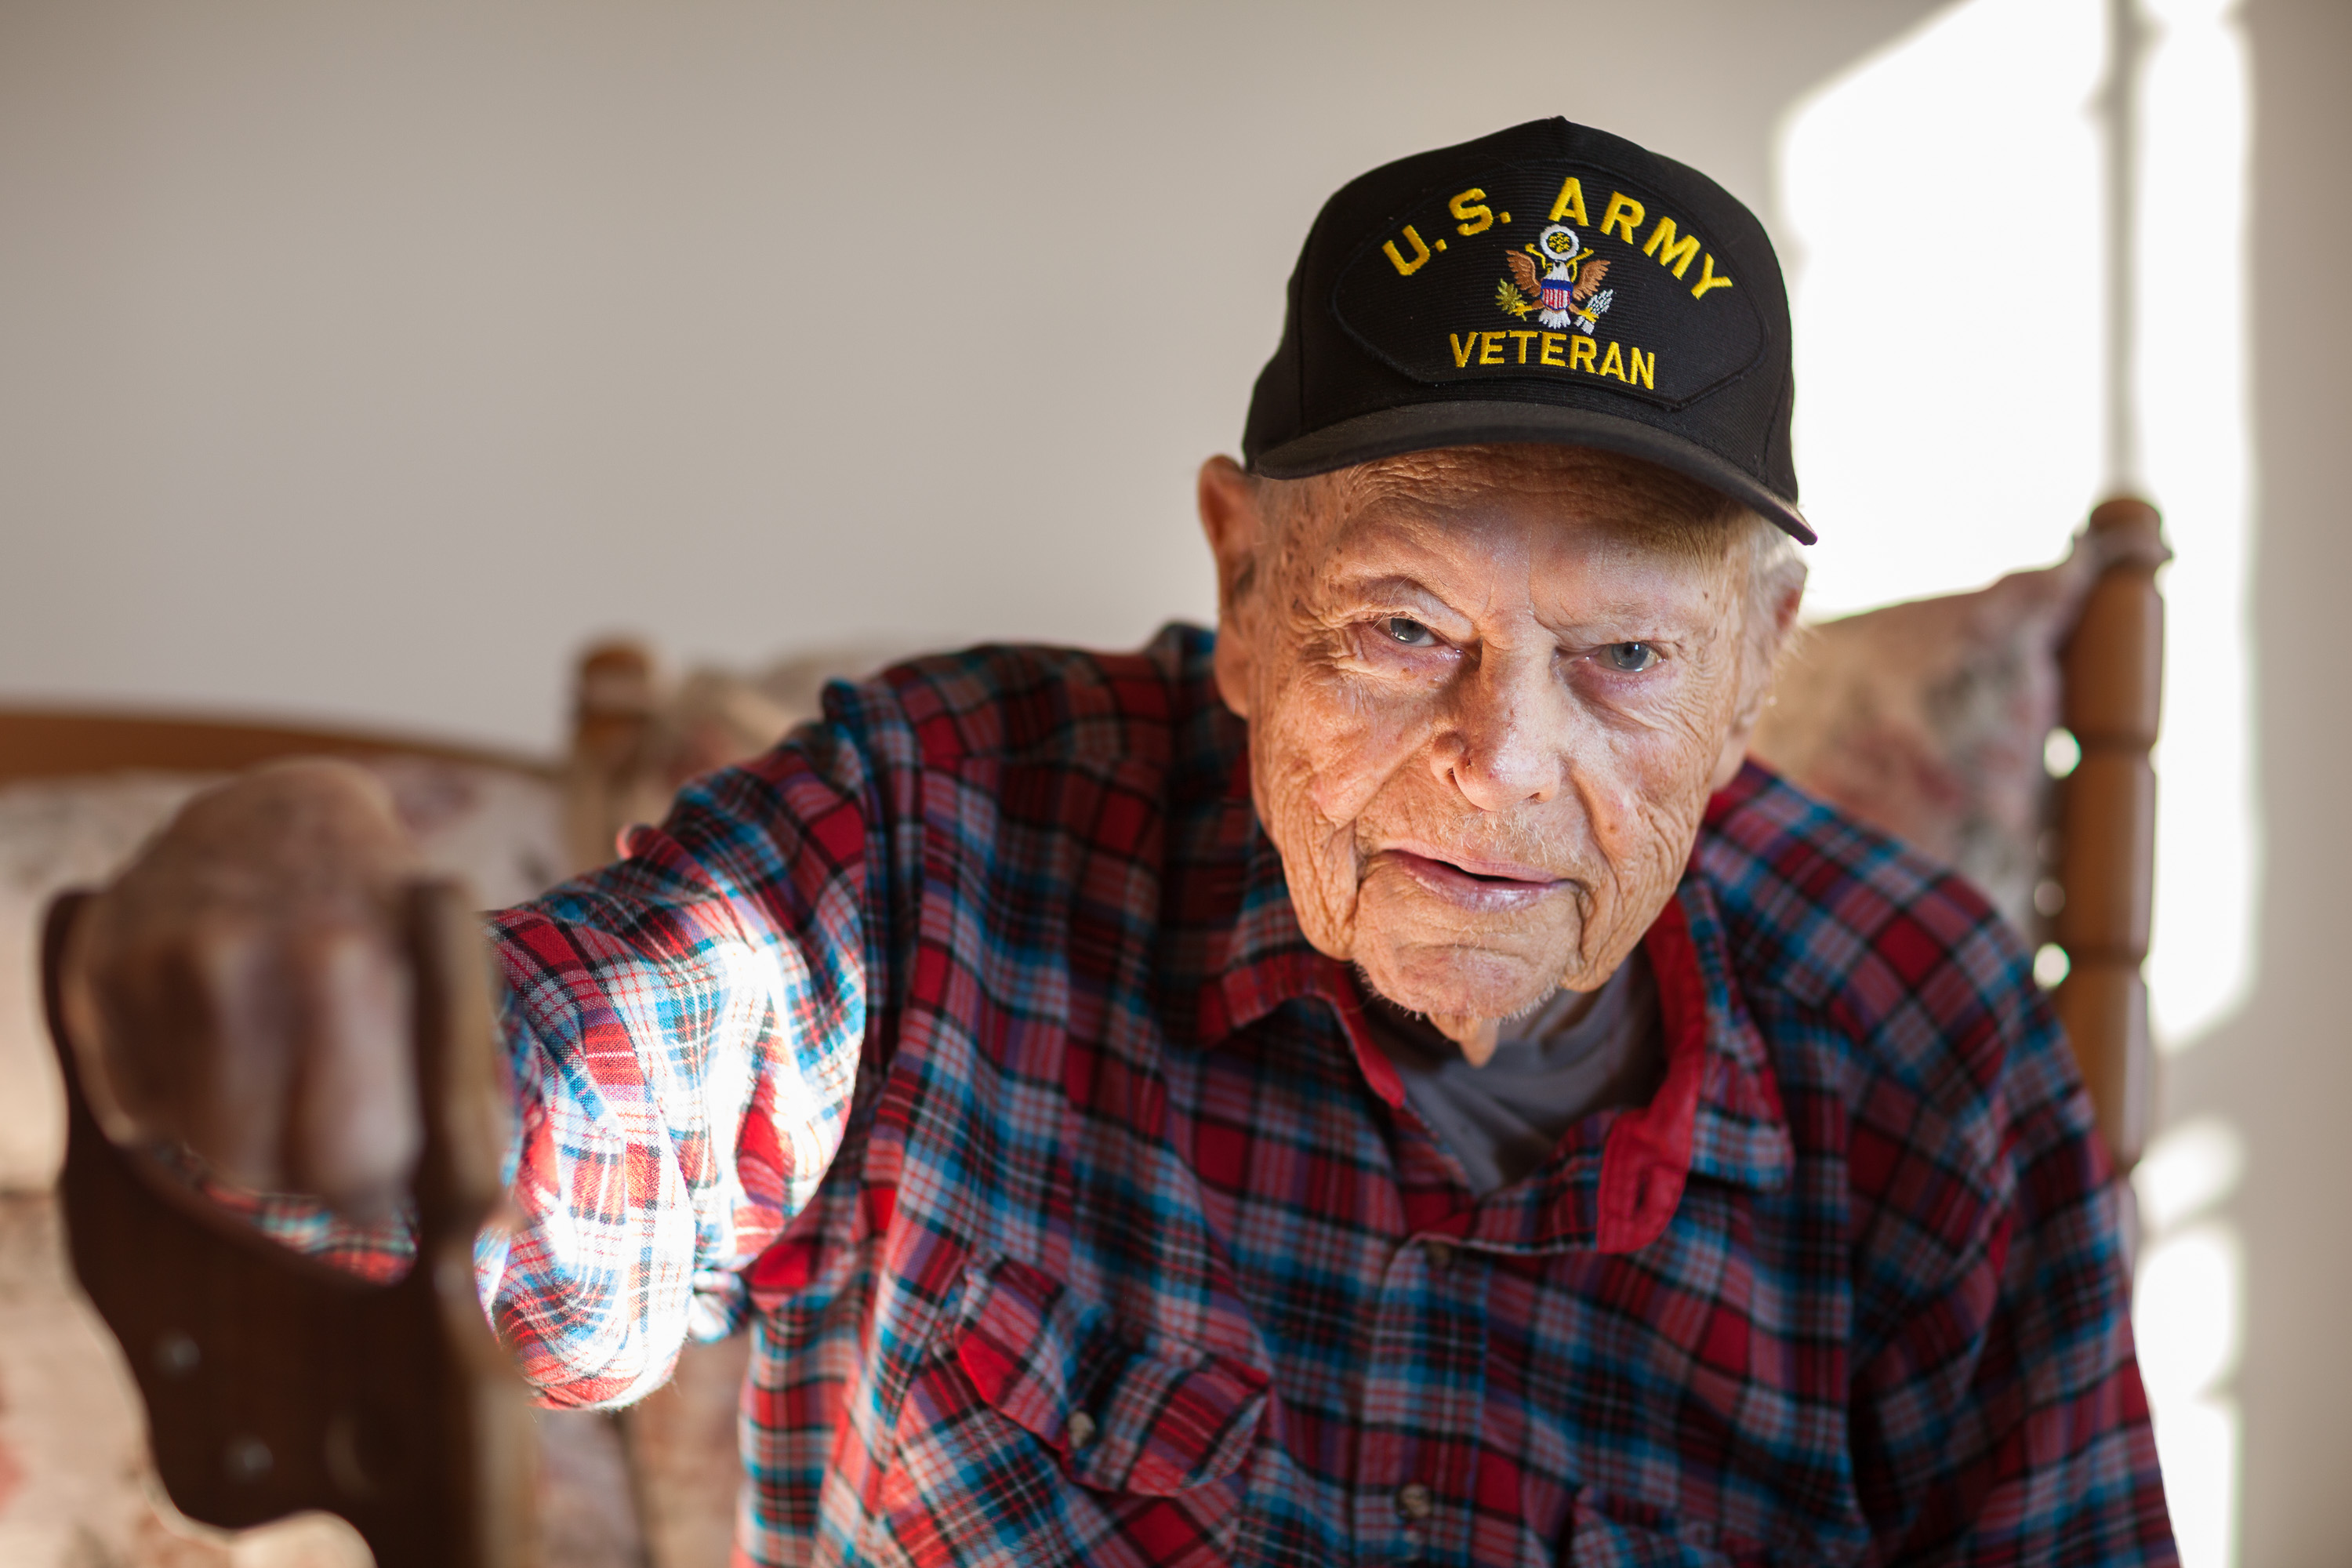 Veteran served by Meals on Wheels